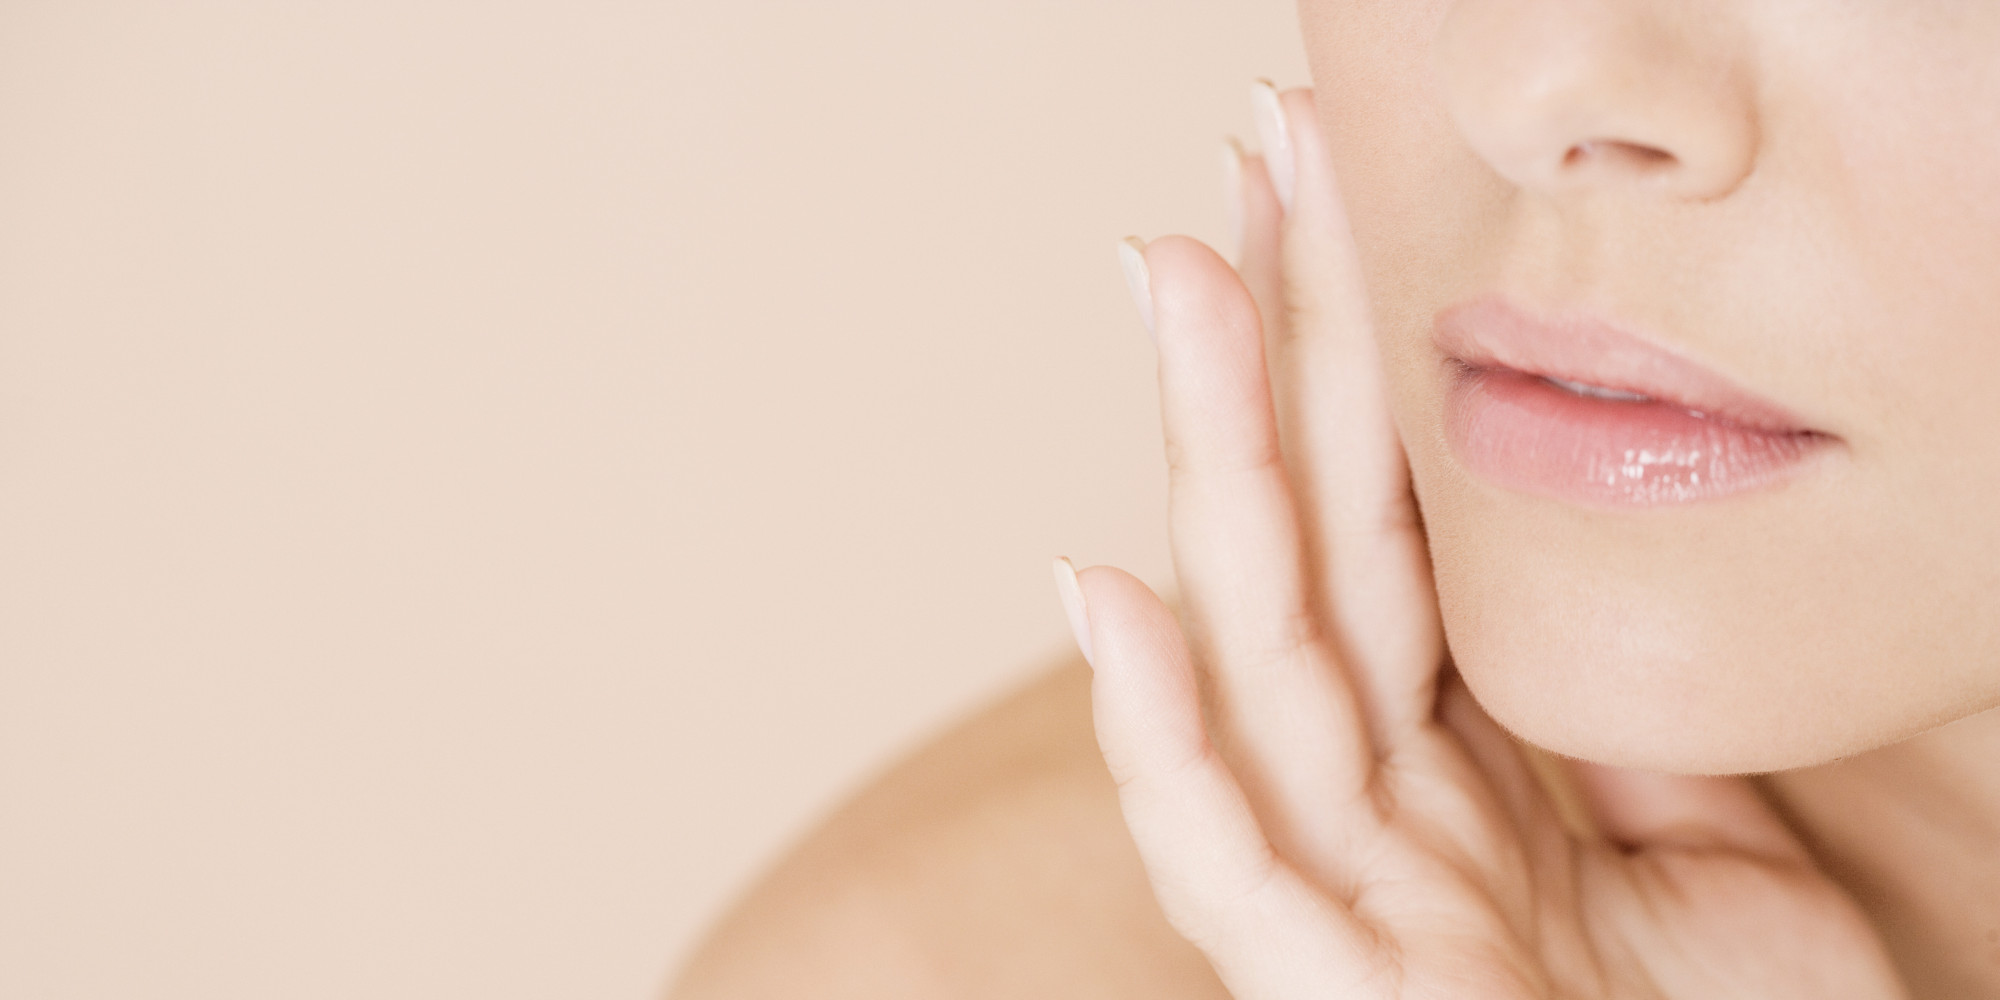 7 Weird Things That Could Be Damaging Your Skin | HuffPost